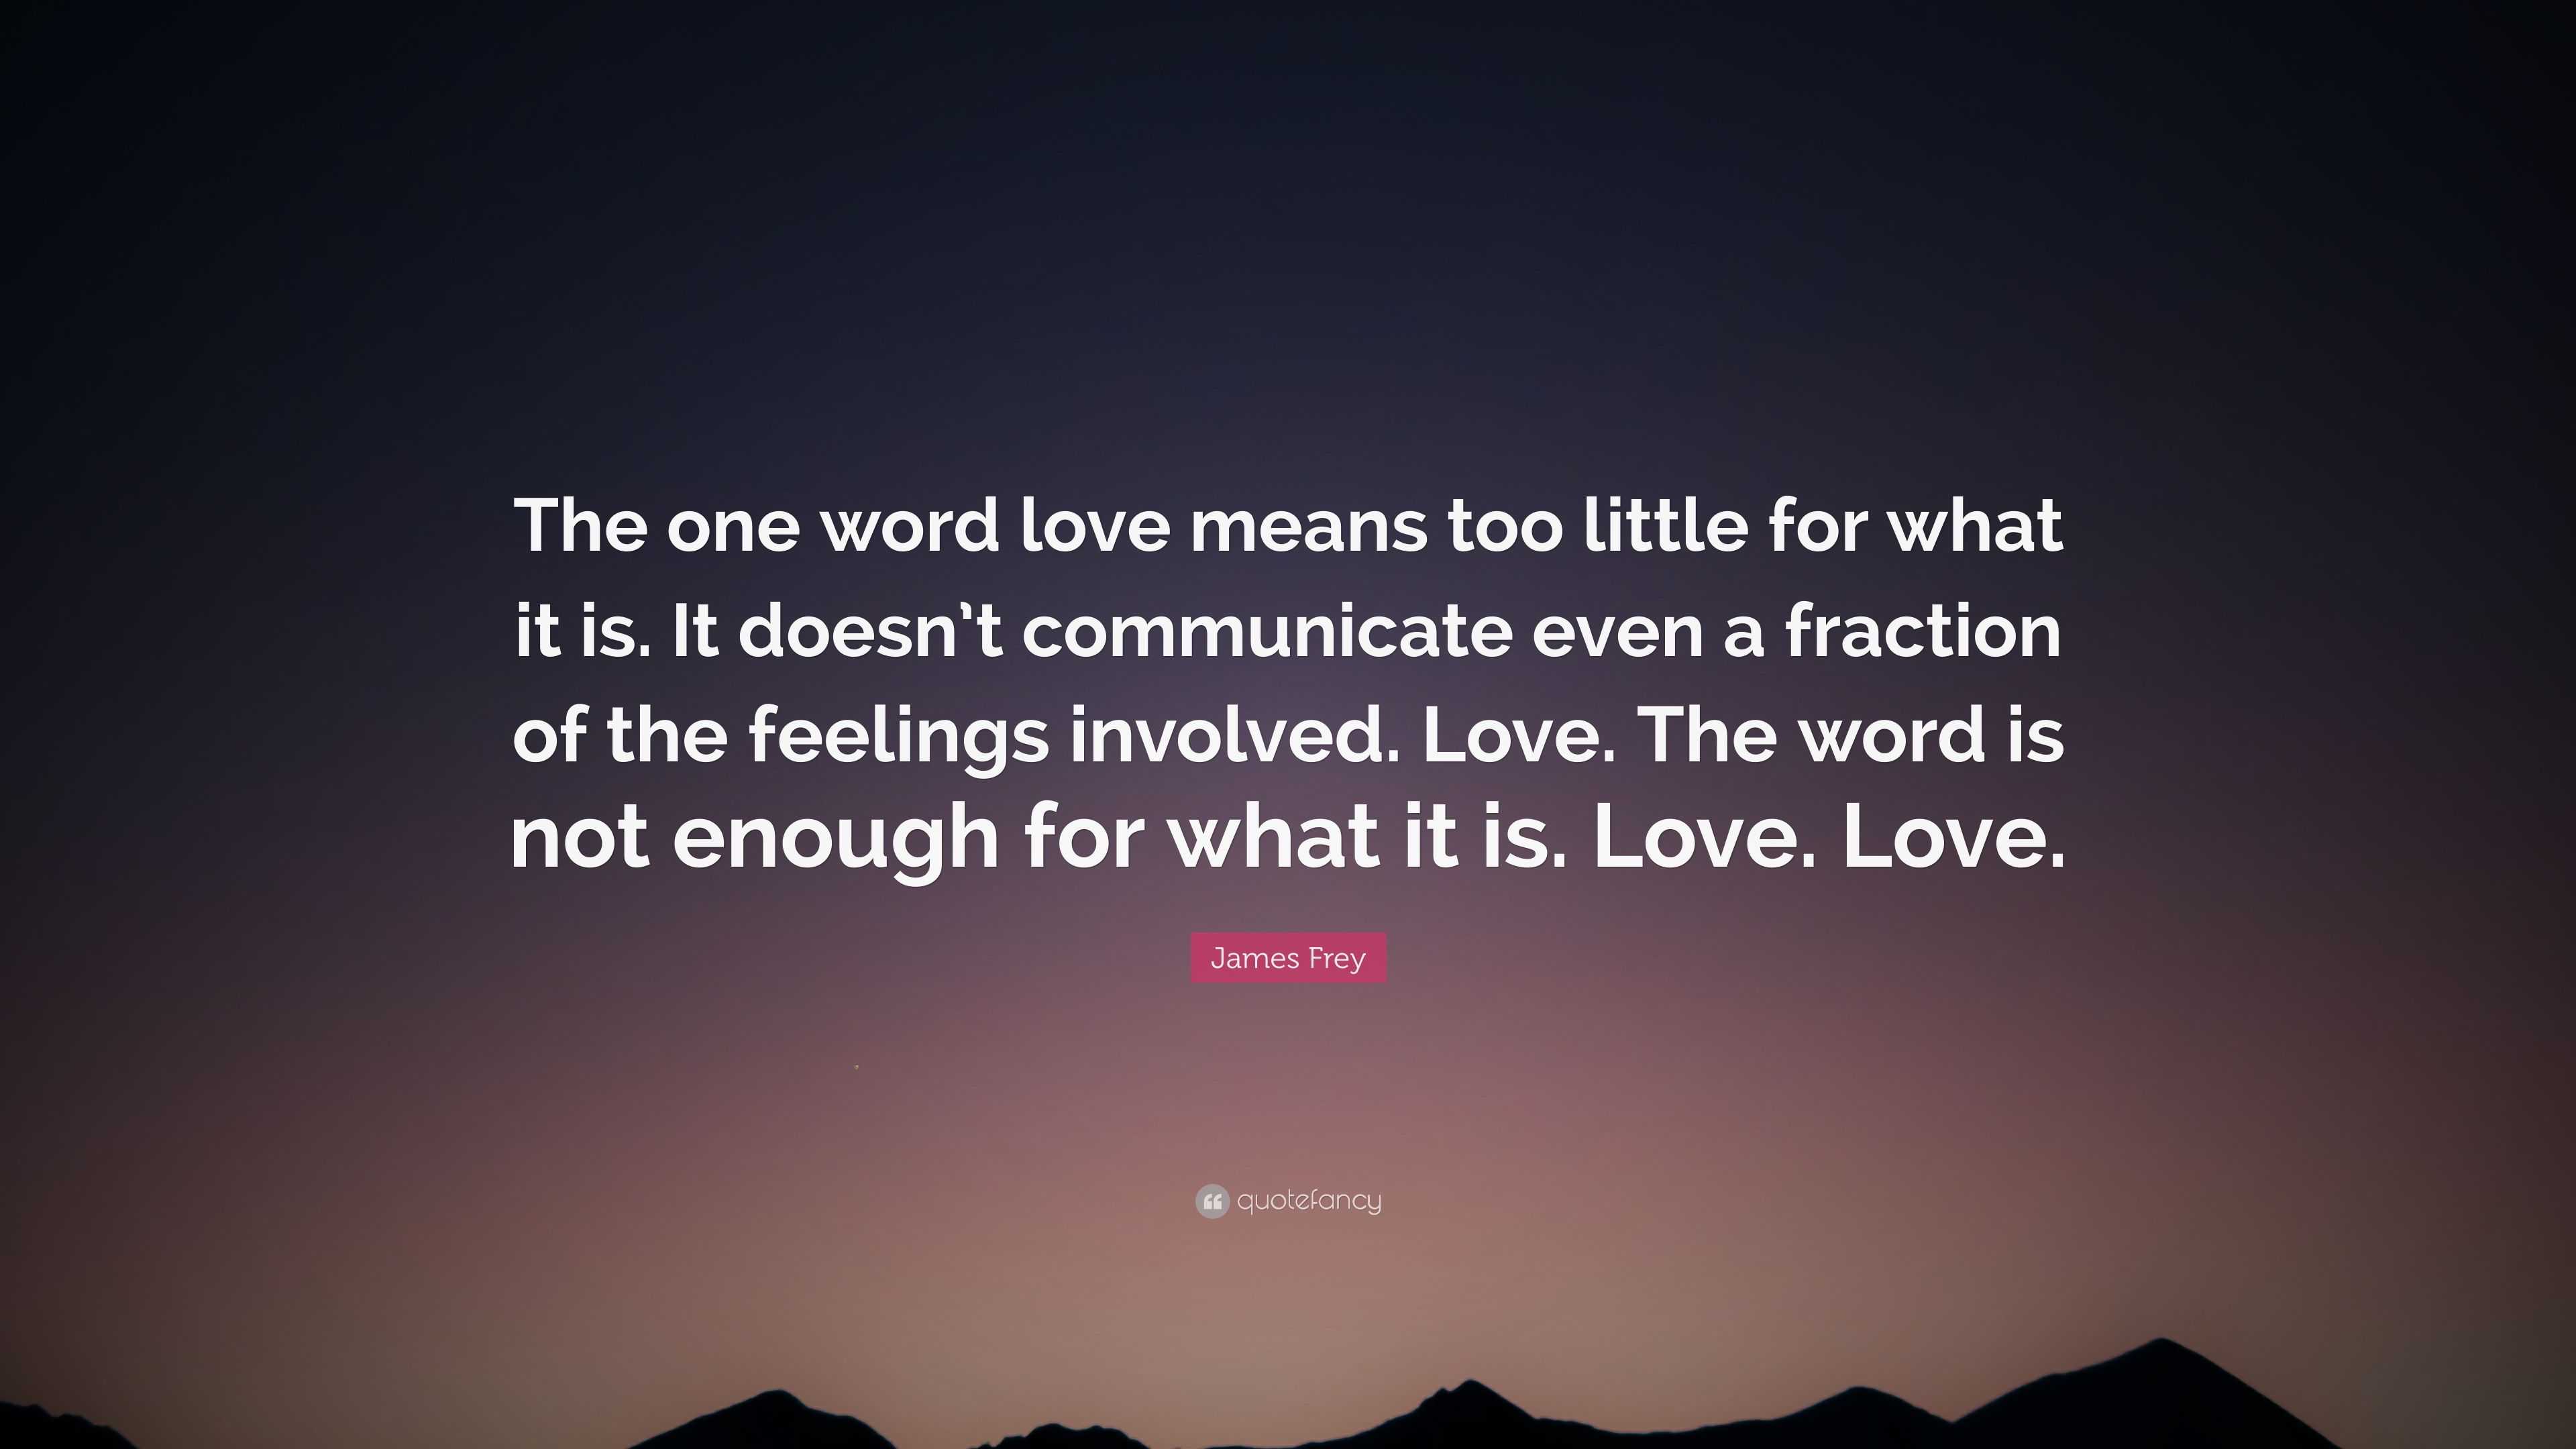 James Frey Quote “The one word love means too little for what it is